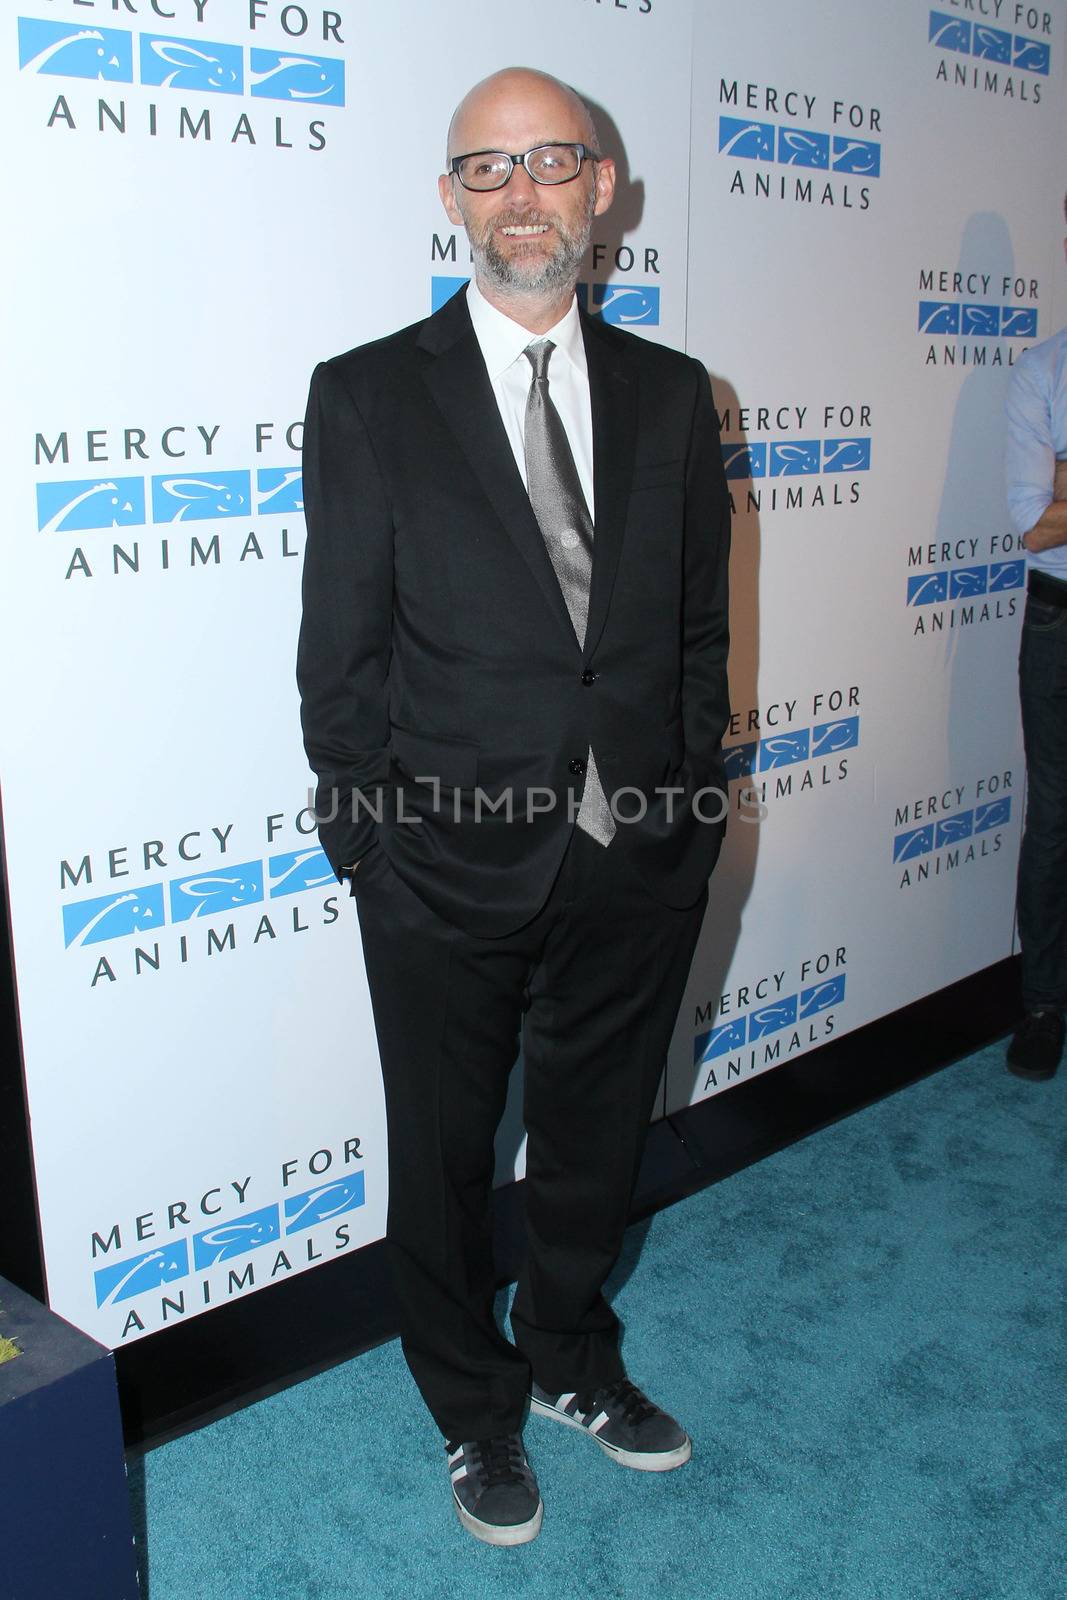 Moby
Mercy For Animals 15th Anniversary Gala, The London, West Hollywood, CA 09-12-14/ImageCollect by ImageCollect